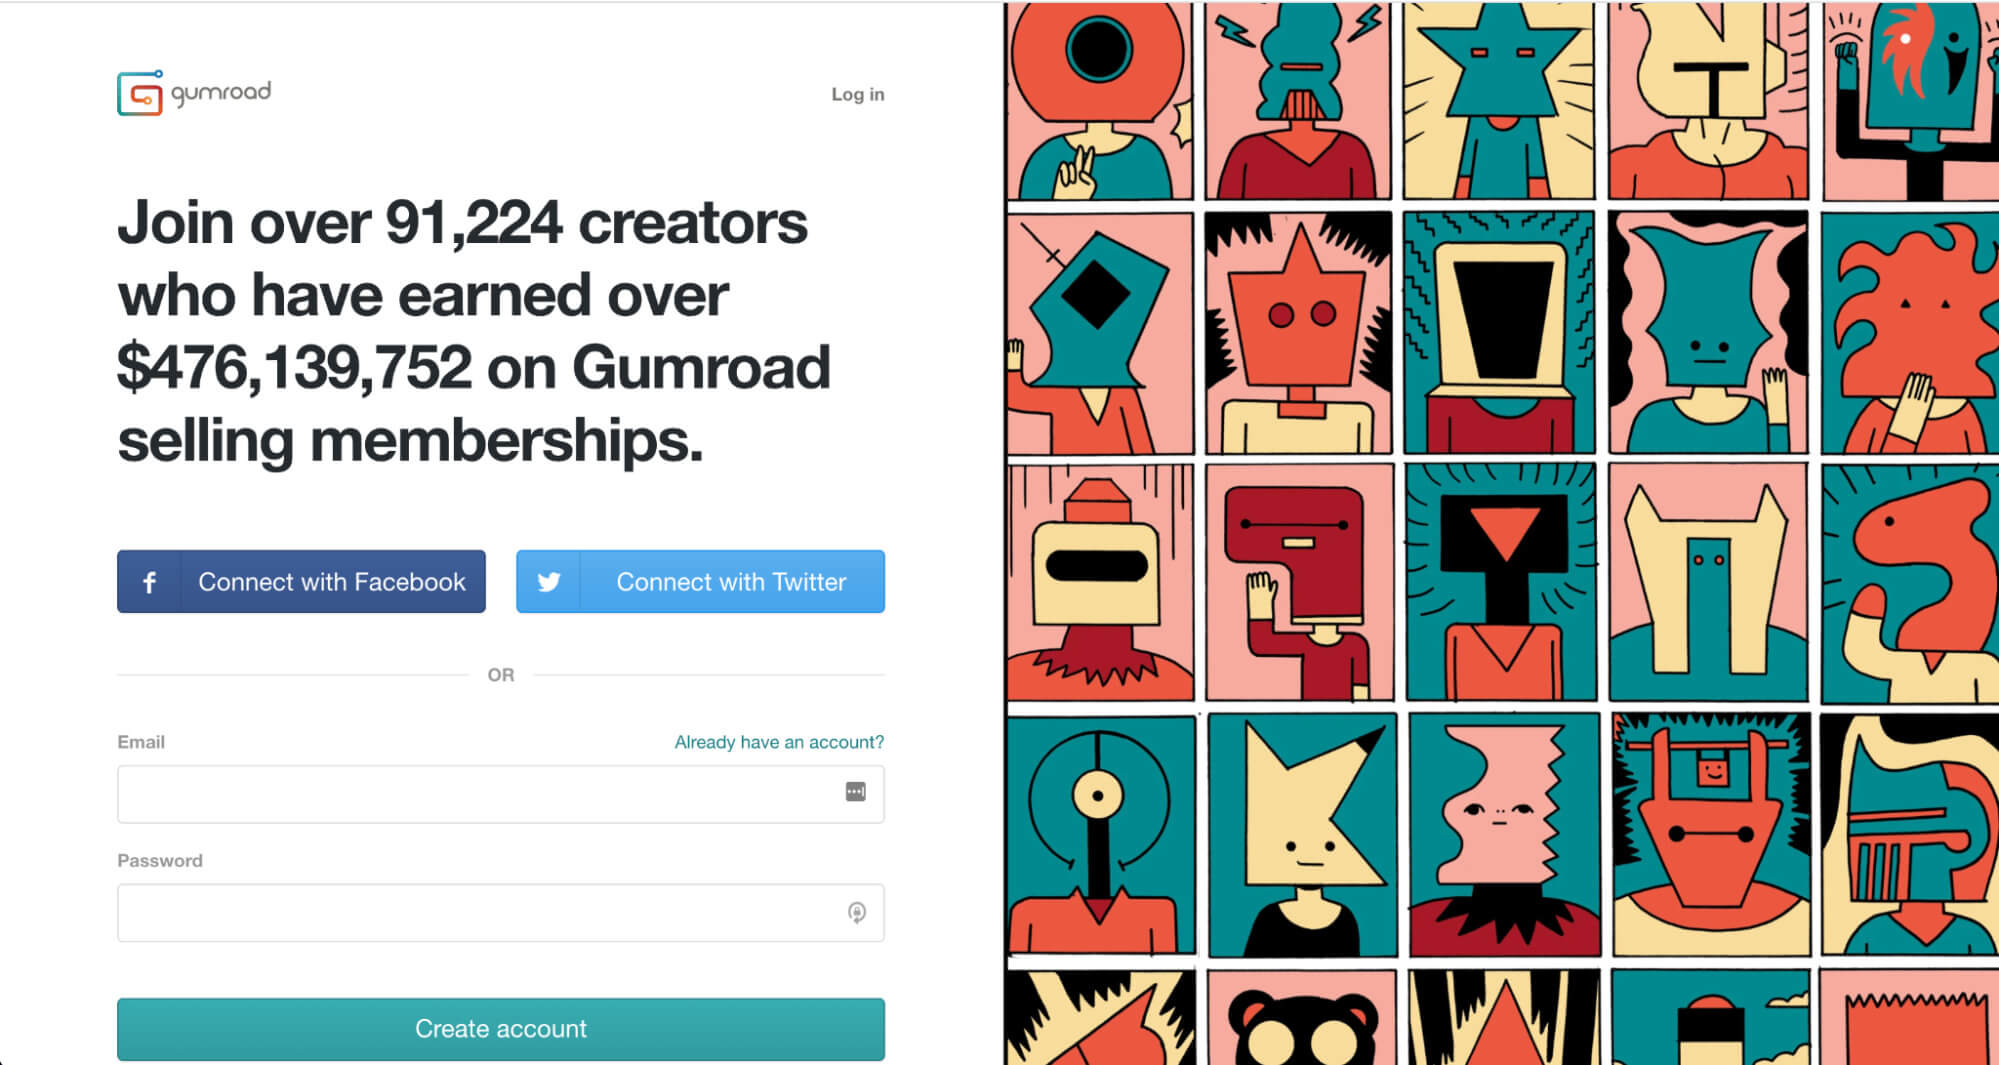 Gumroads login page and value proposition